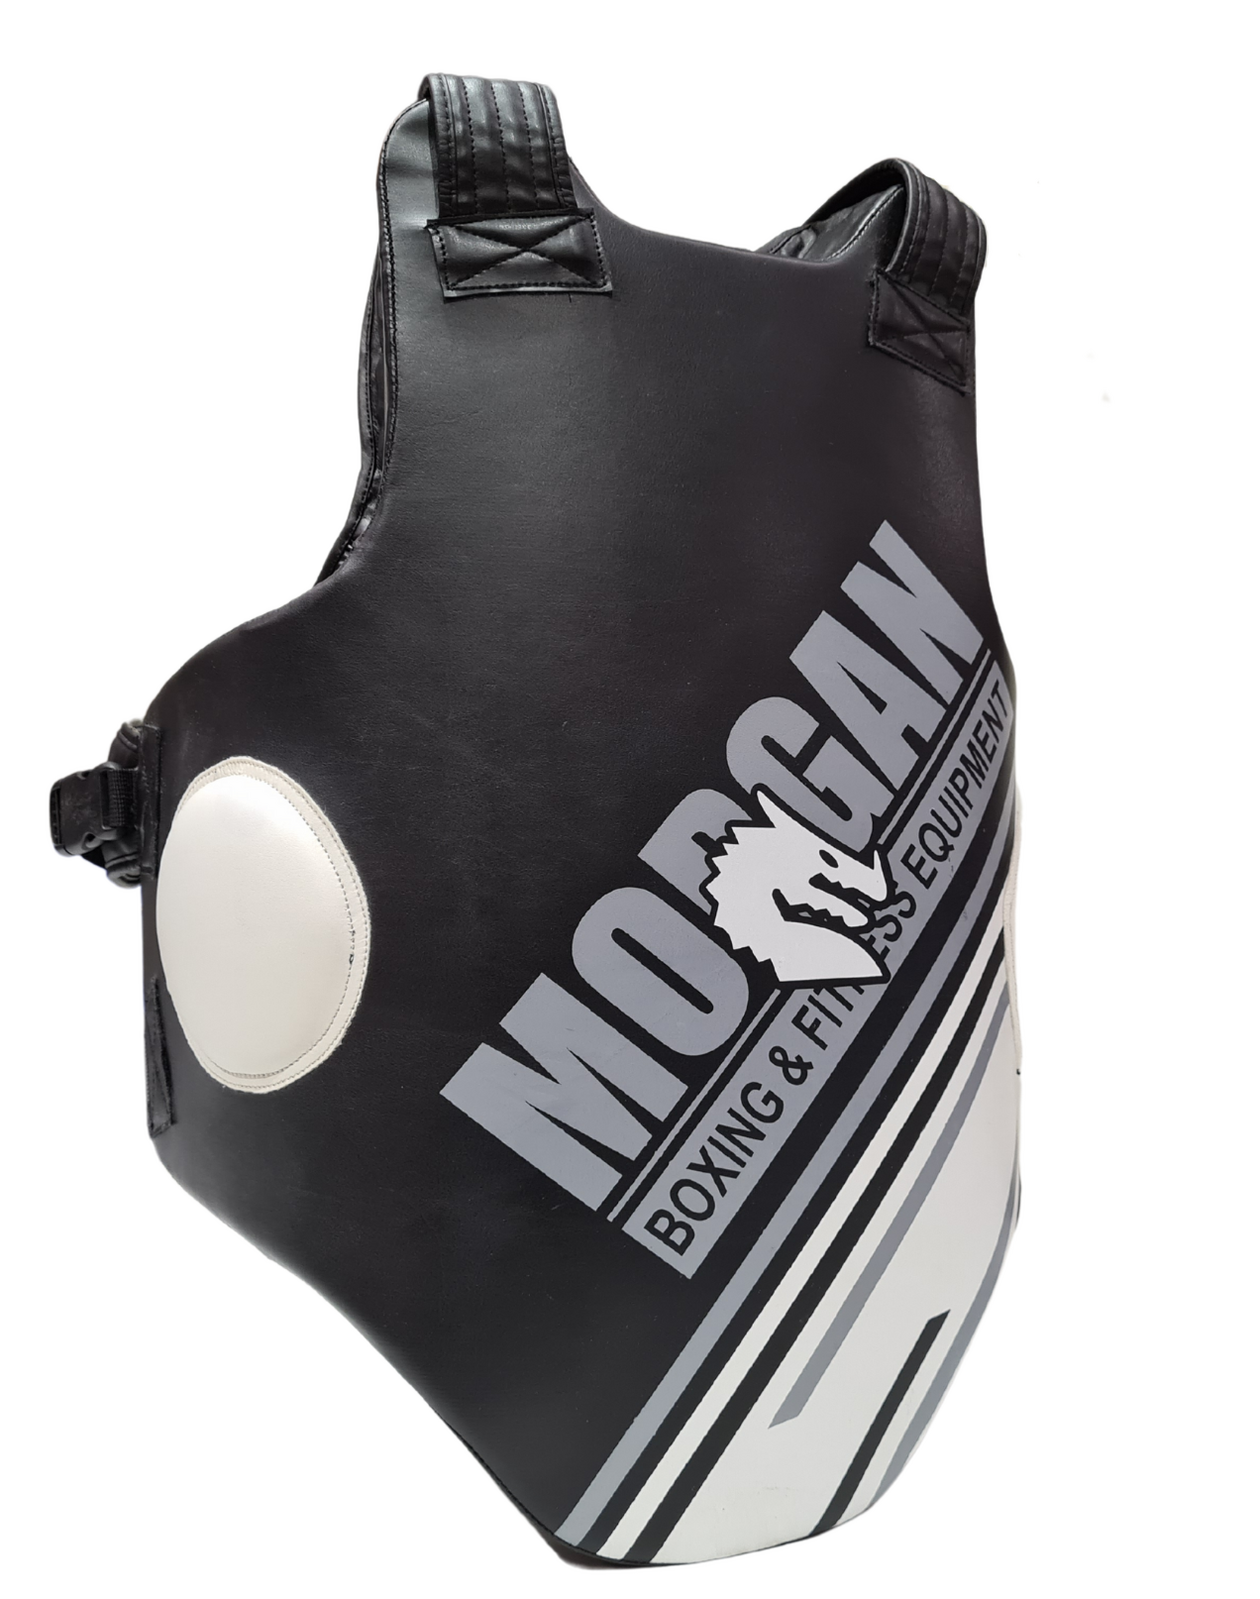 The Morgan Elite Body Protector has been a favourite of trainers for years. Its sleek, elongated, and contoured wrap-around design fits snugly and securely for any trainer size — compliments to its adjustable crossing shoulder straps and rear waist strap. The design affords tremendous manoeuvrability and freedom of movement by the trainer during use.